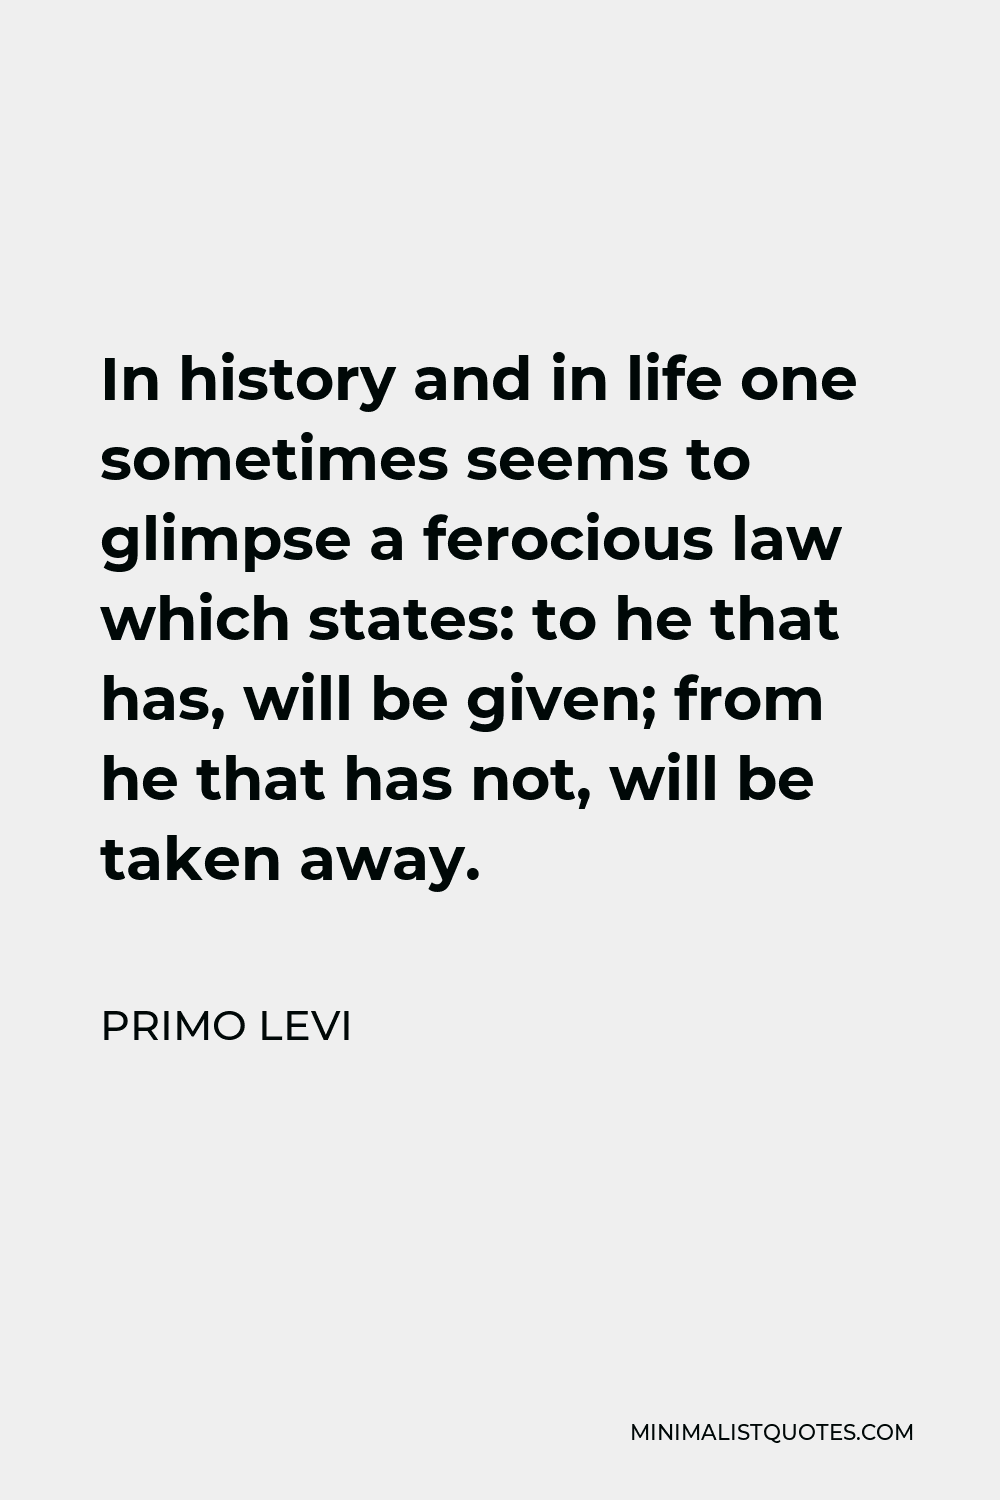 Primo Levi Quote - In history and in life one sometimes seems to glimpse a ferocious law which states: to he that has, will be given; from he that has not, will be taken away.